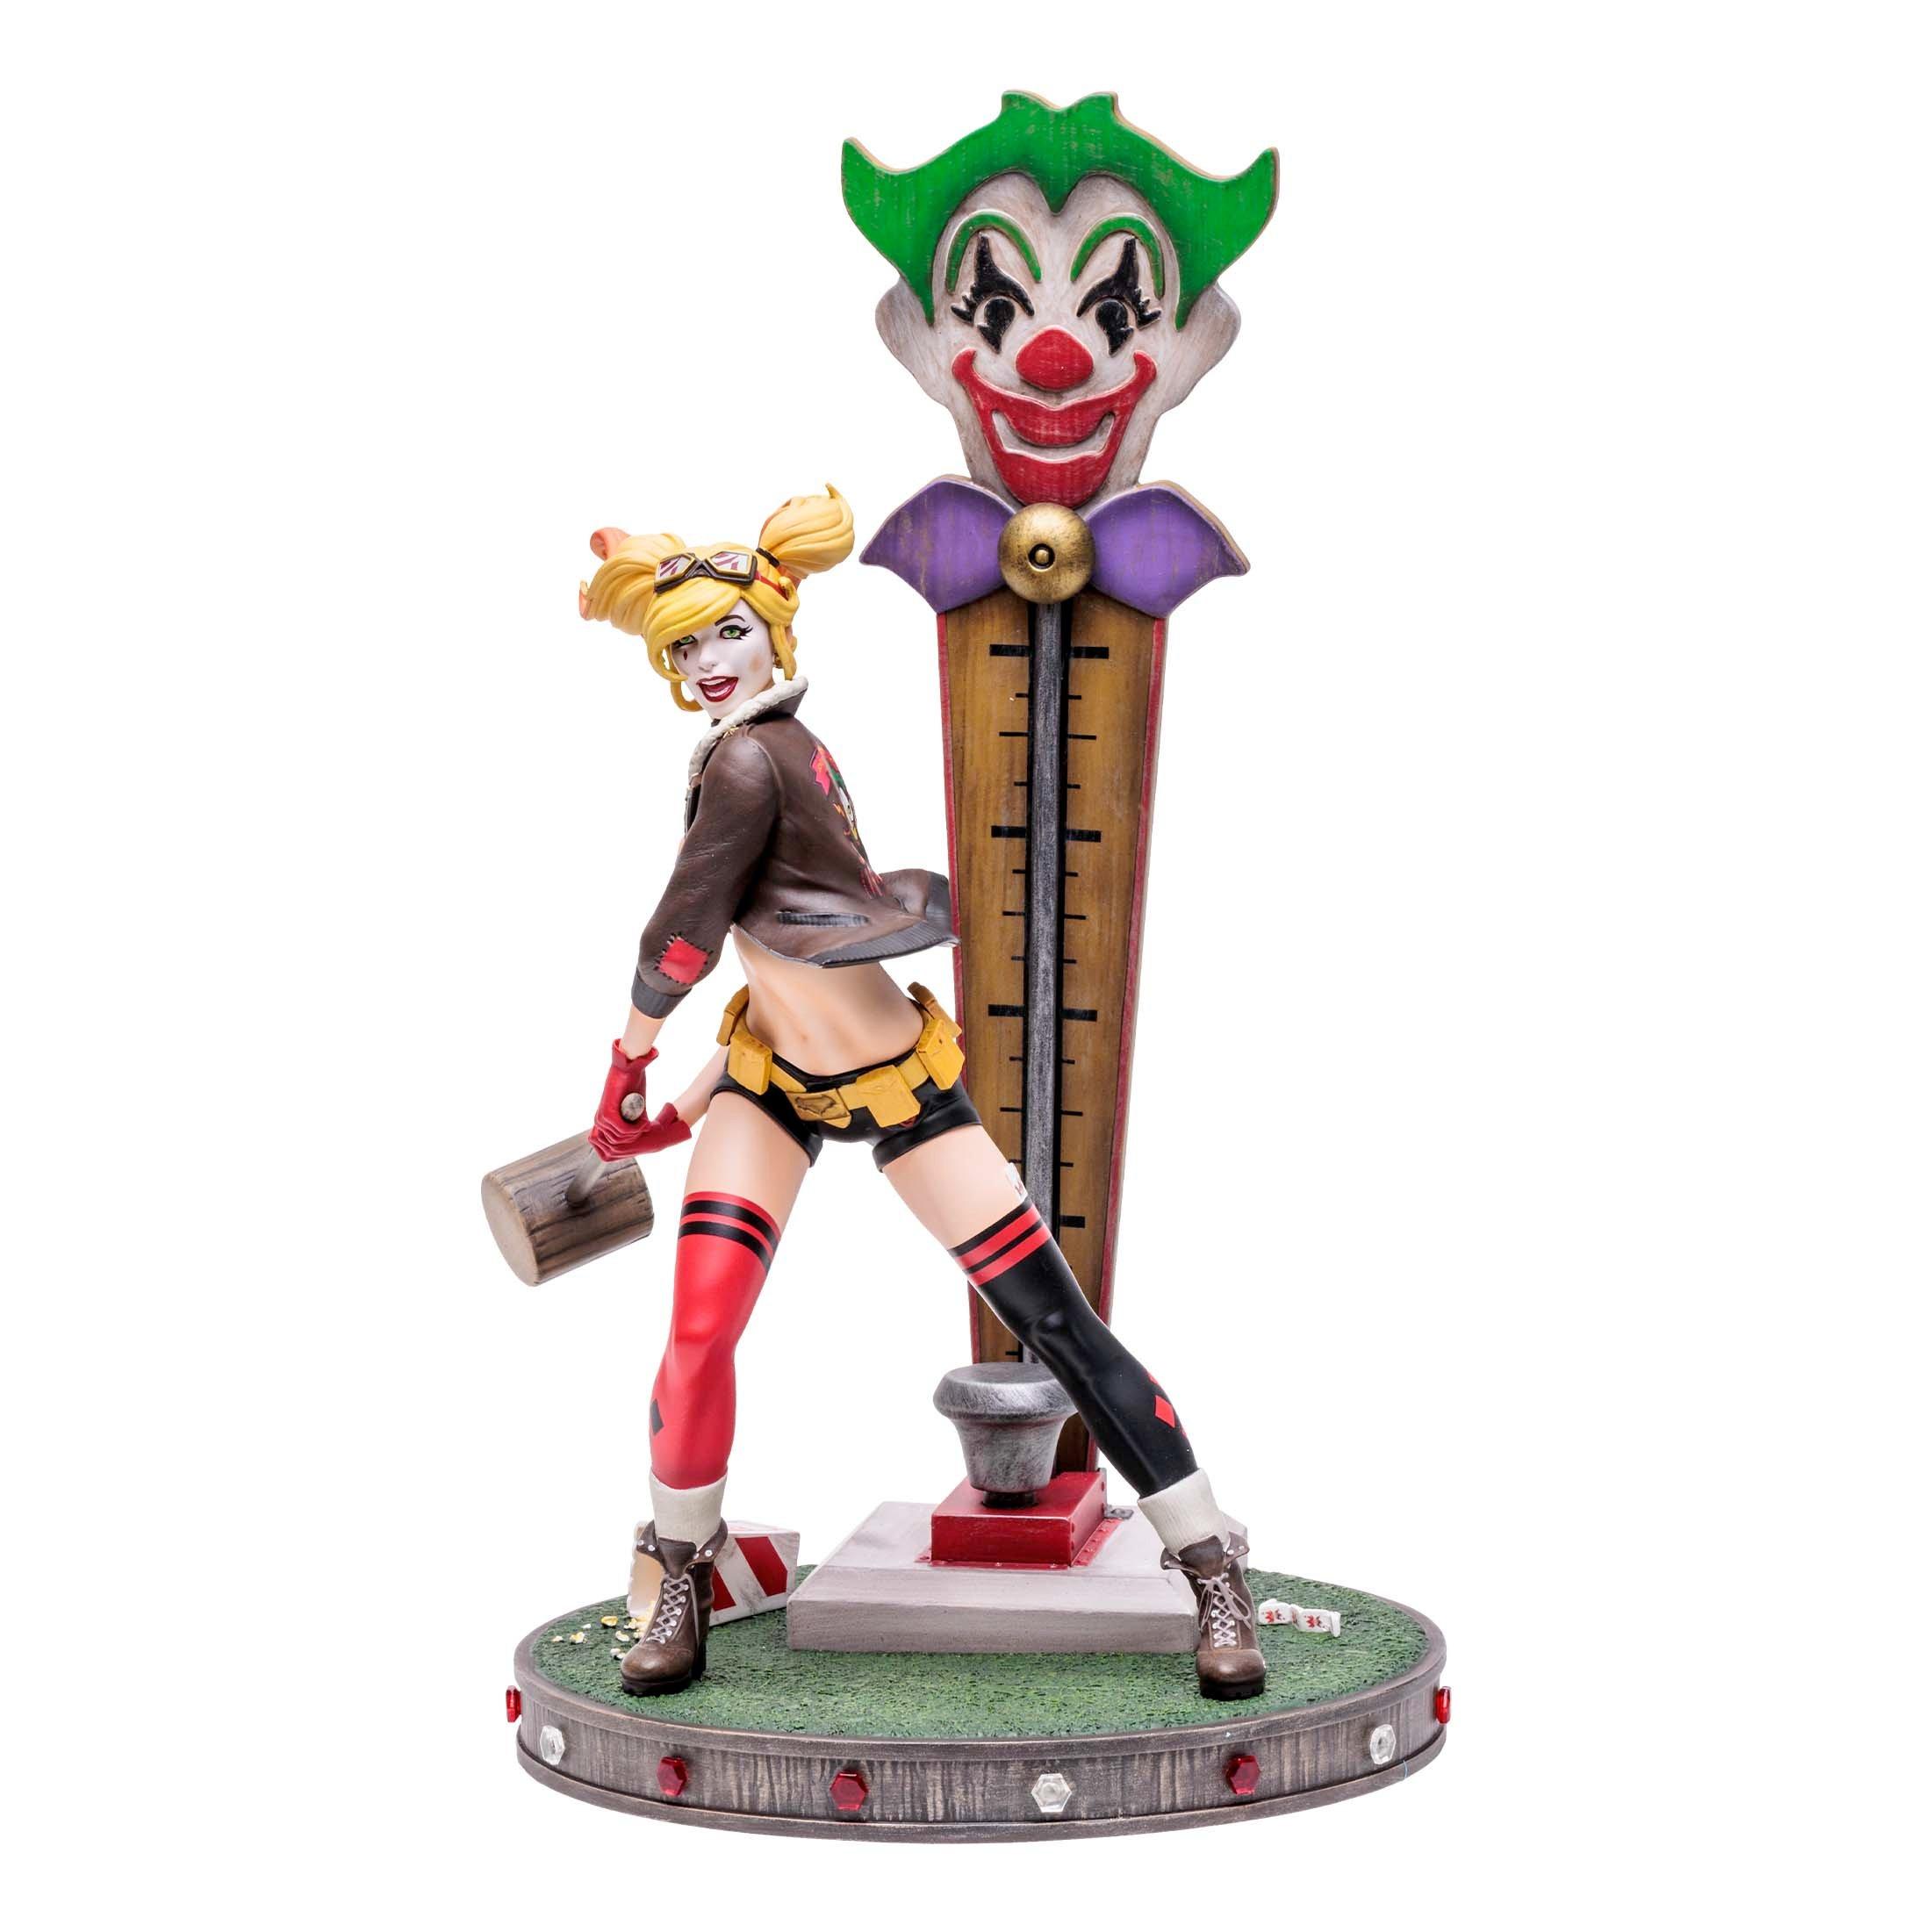 McFarlane Toys DC Direct DC Bombshells Harley Quinn Version 2 Deluxe 1:8 Scale Statue Limited Edition